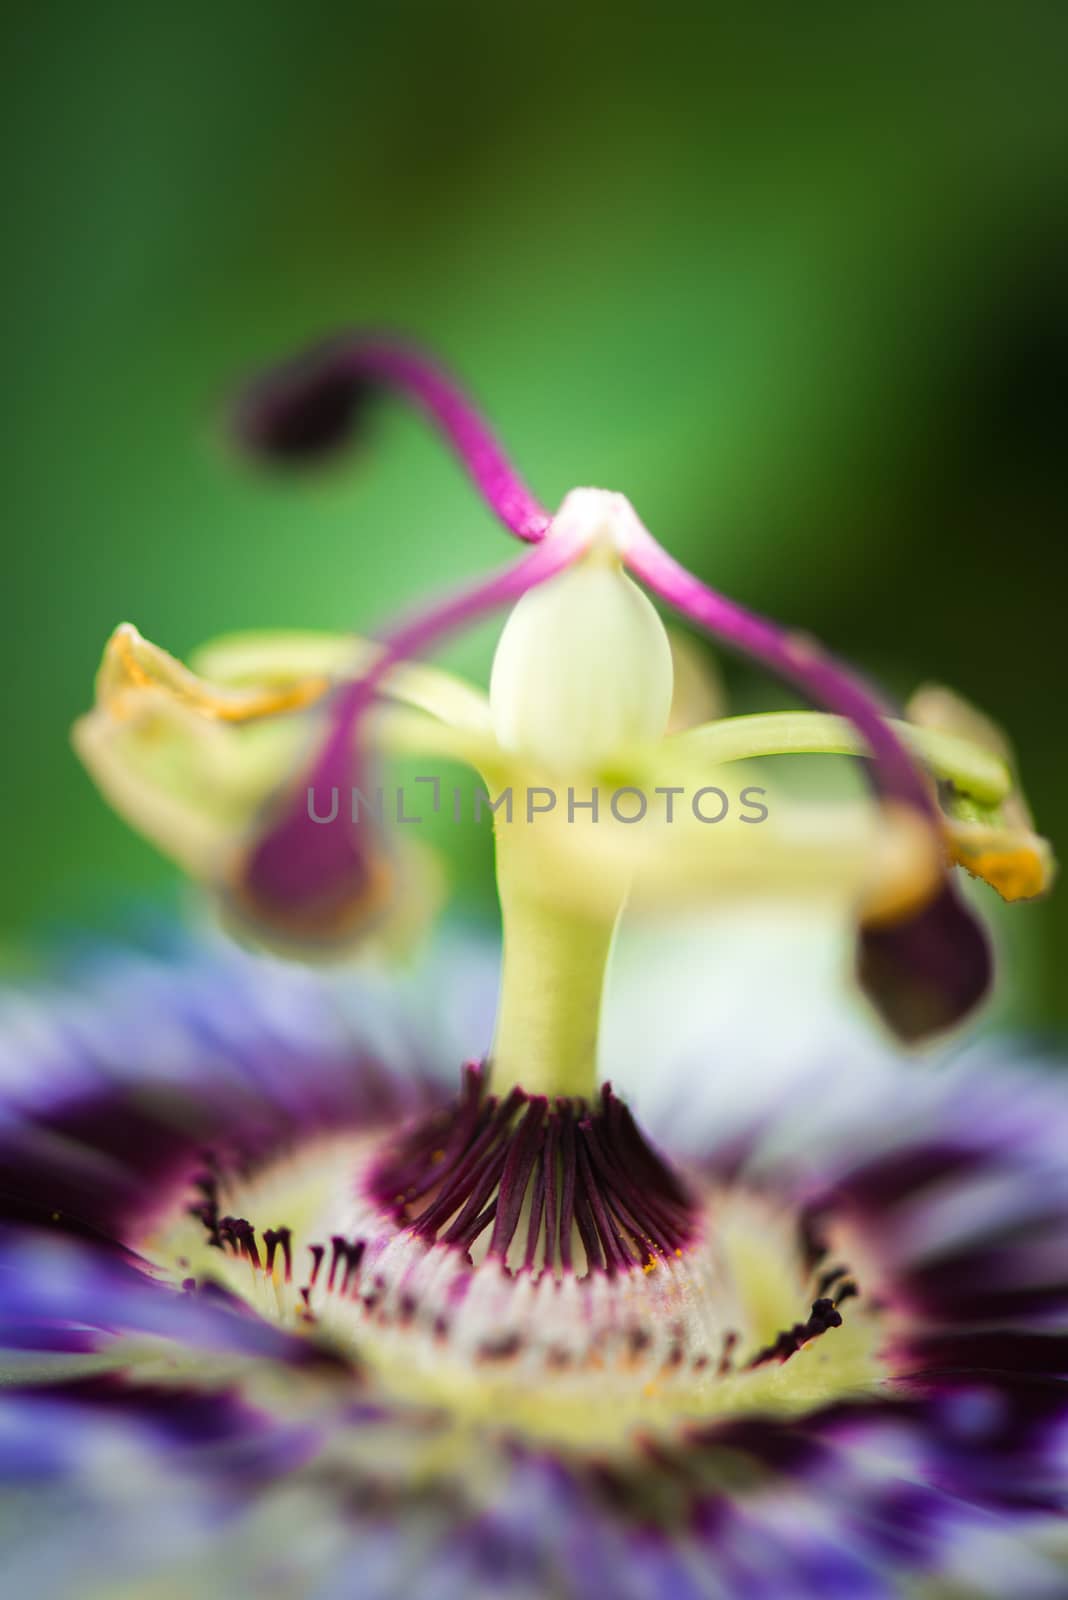 Amazing details of a beautiful Passion Fruit Flower